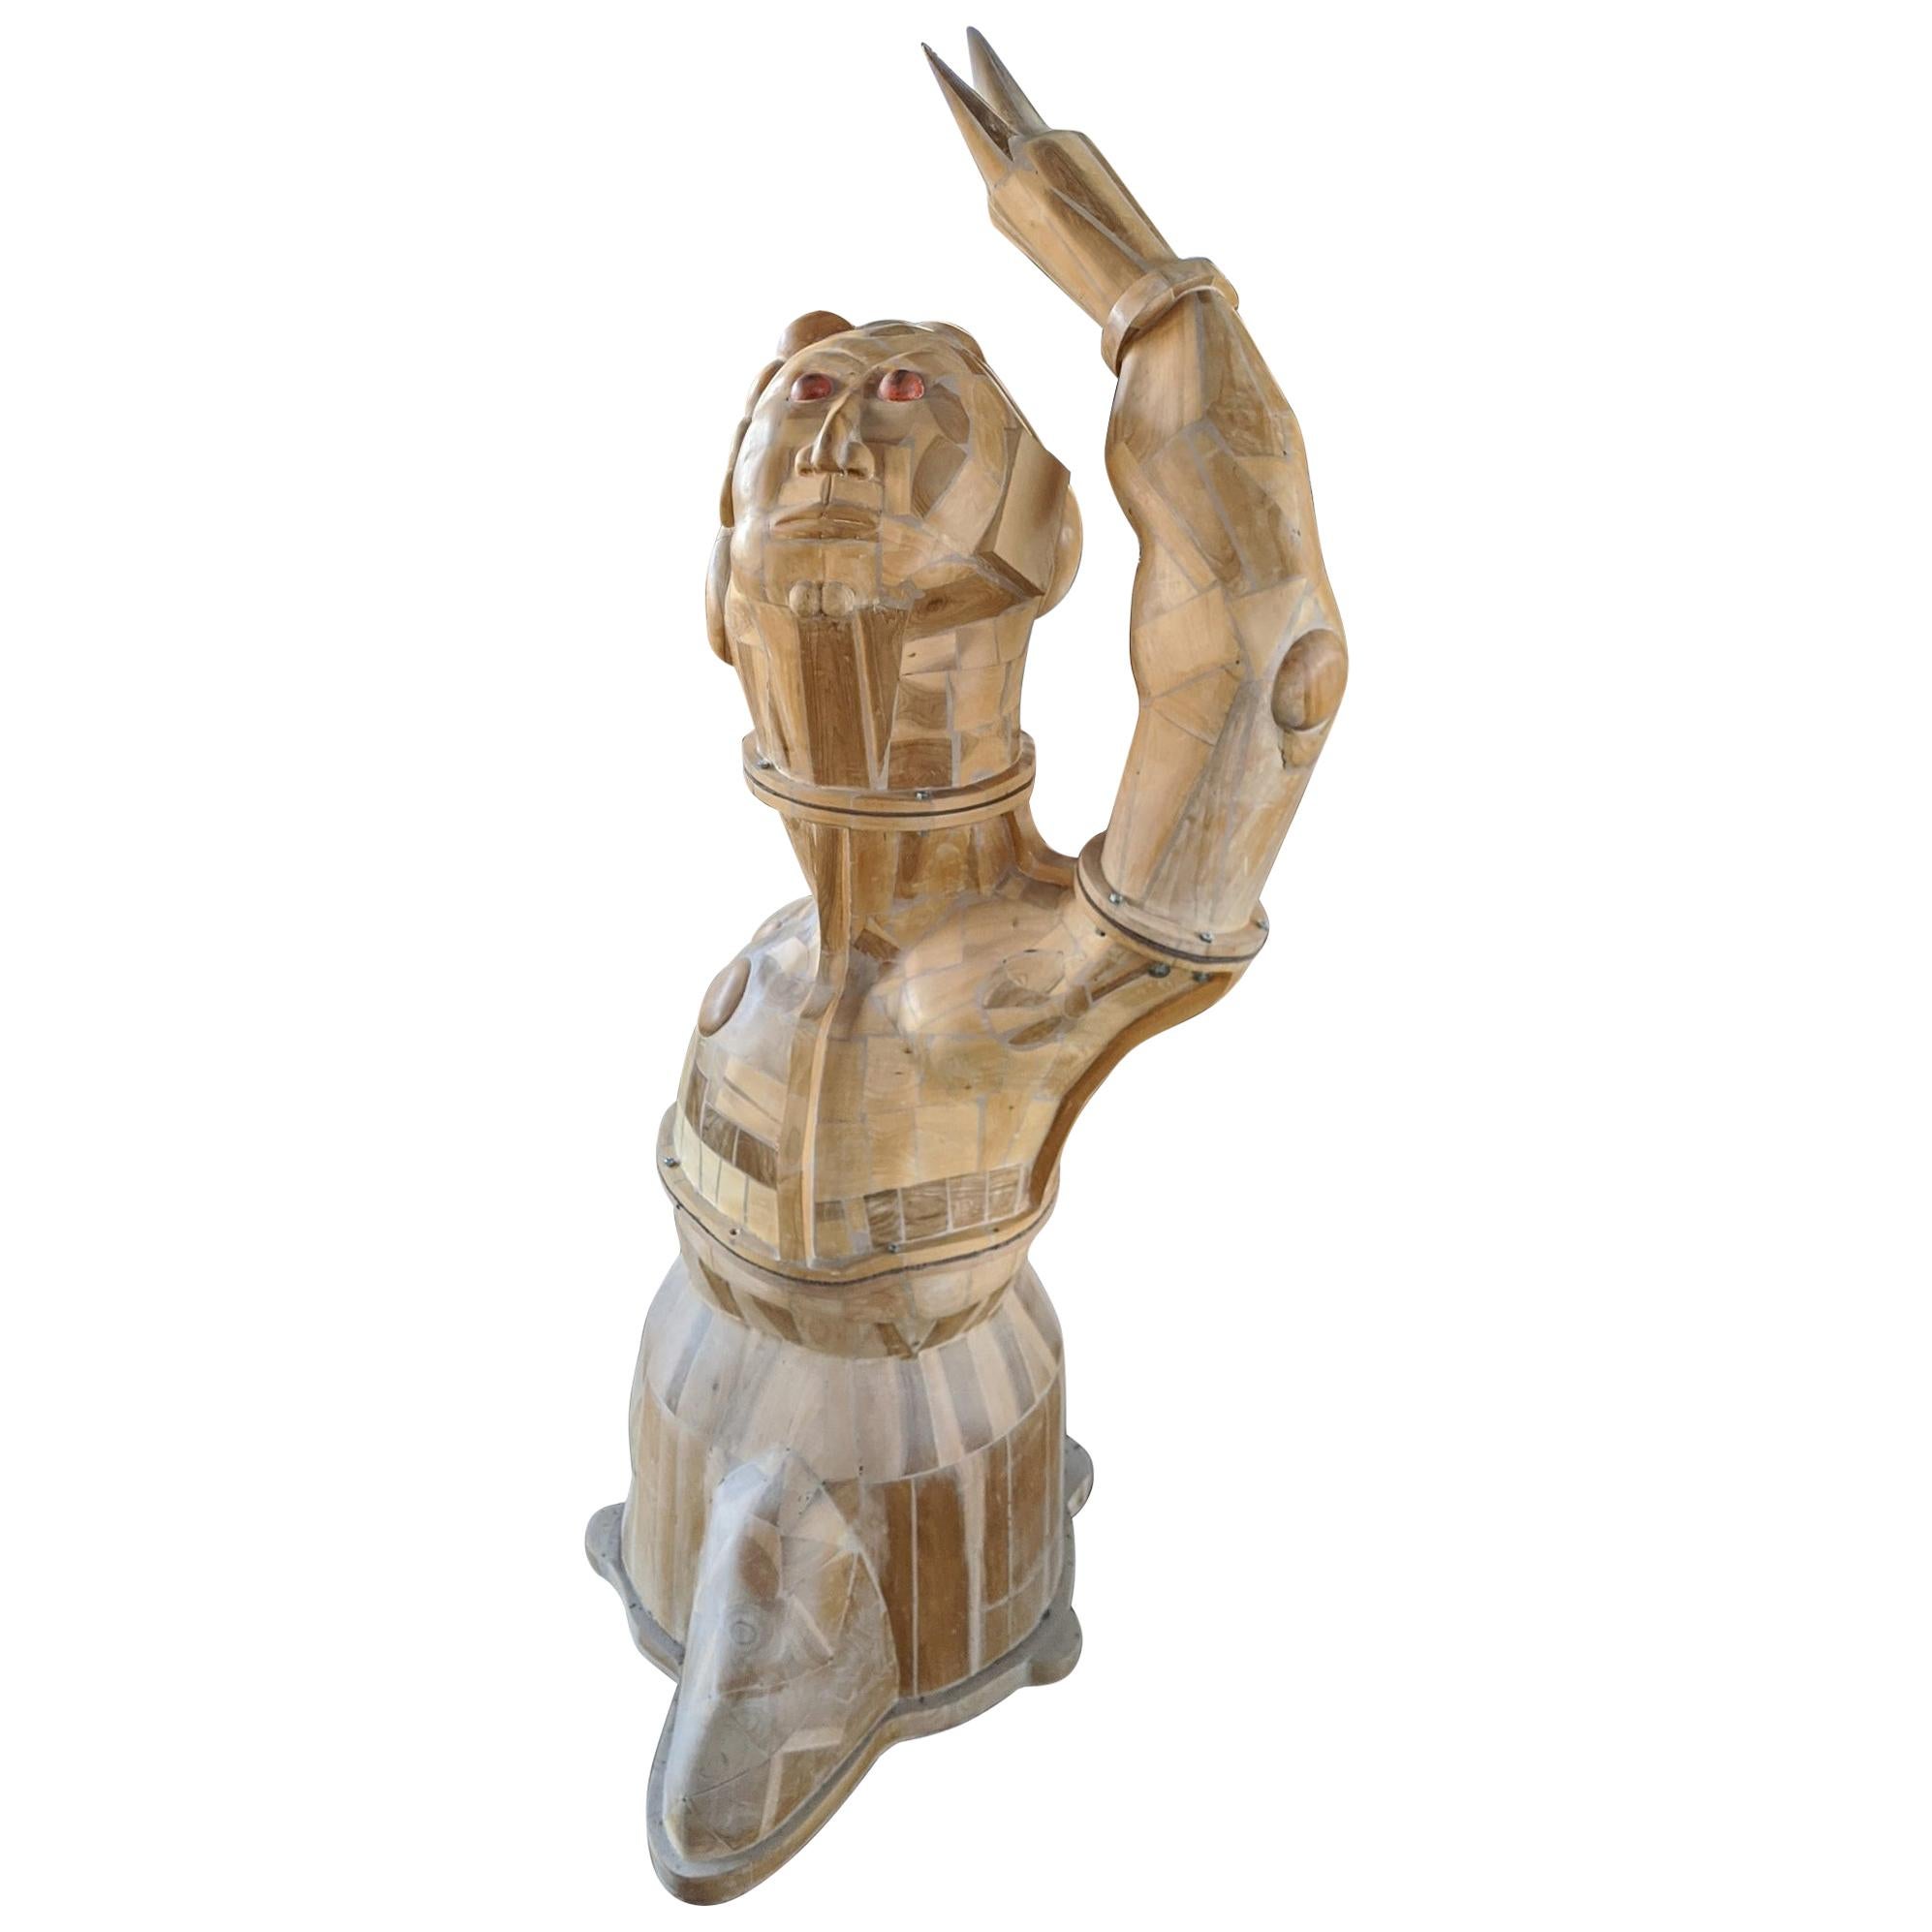 Monumental Mechanical Wood Angel Art Sculpture Statue by Jay Bolotin For Sale